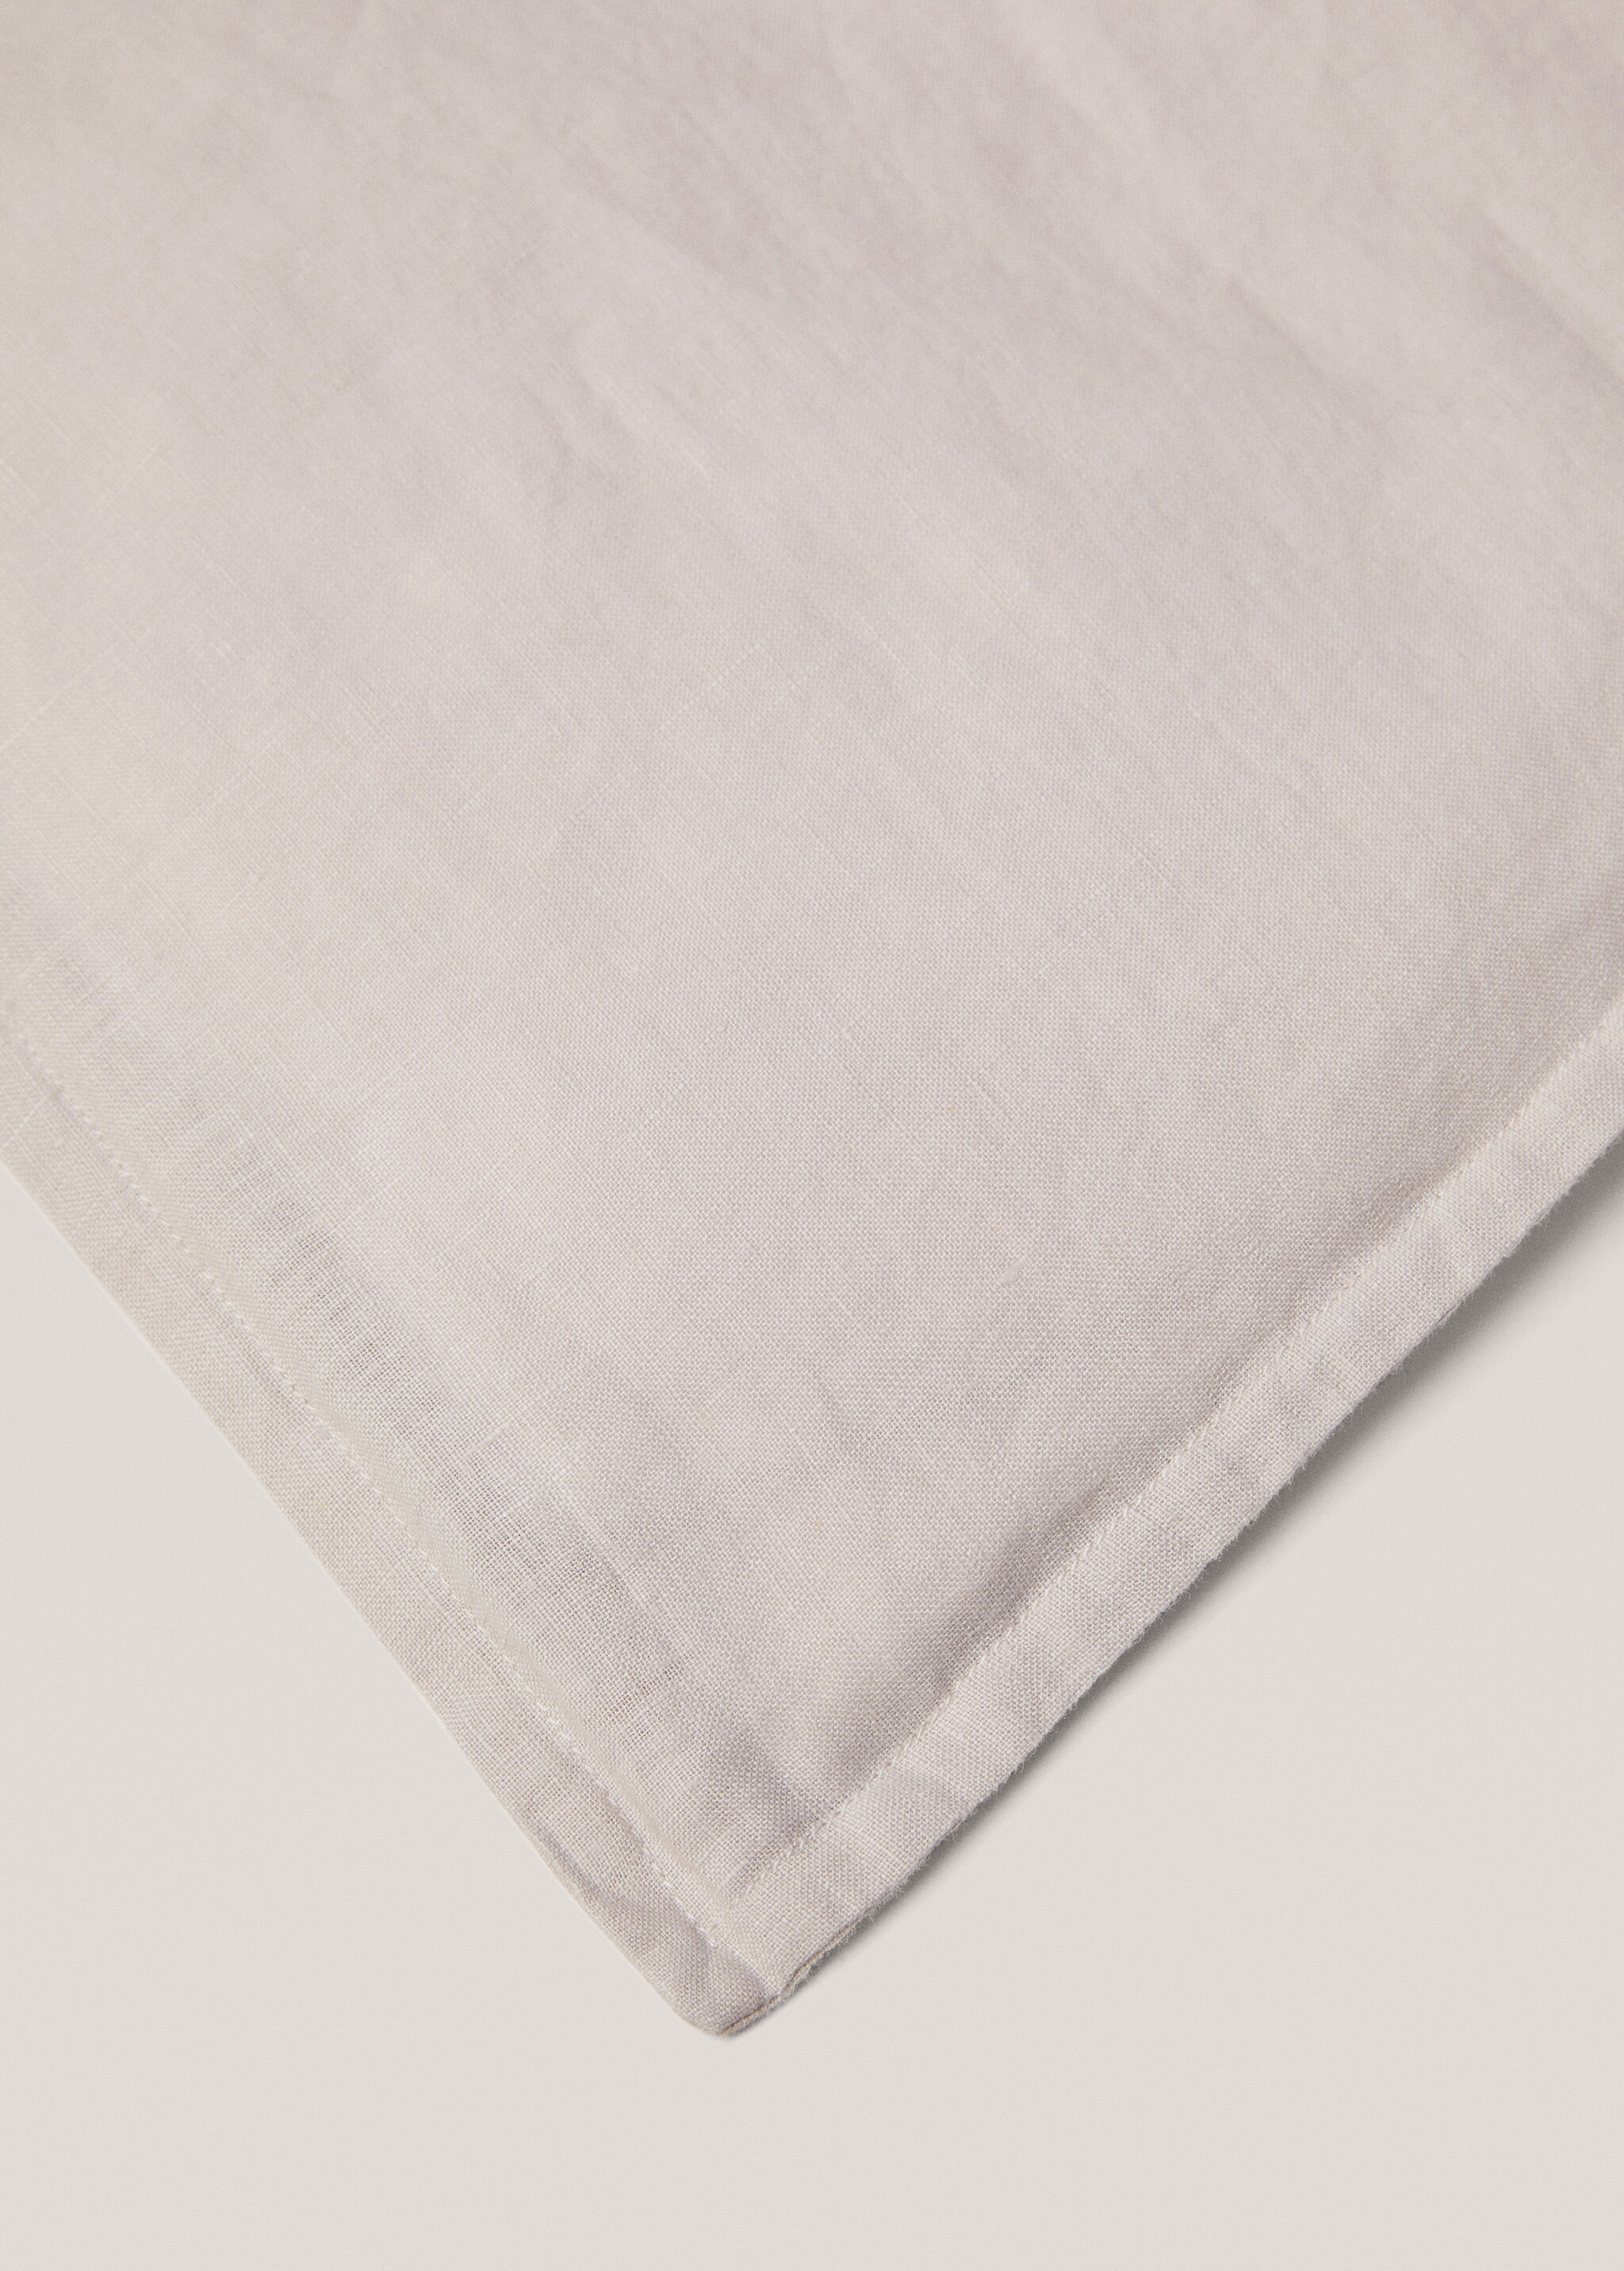 100% linen duvet cover king bed - Details of the article 3